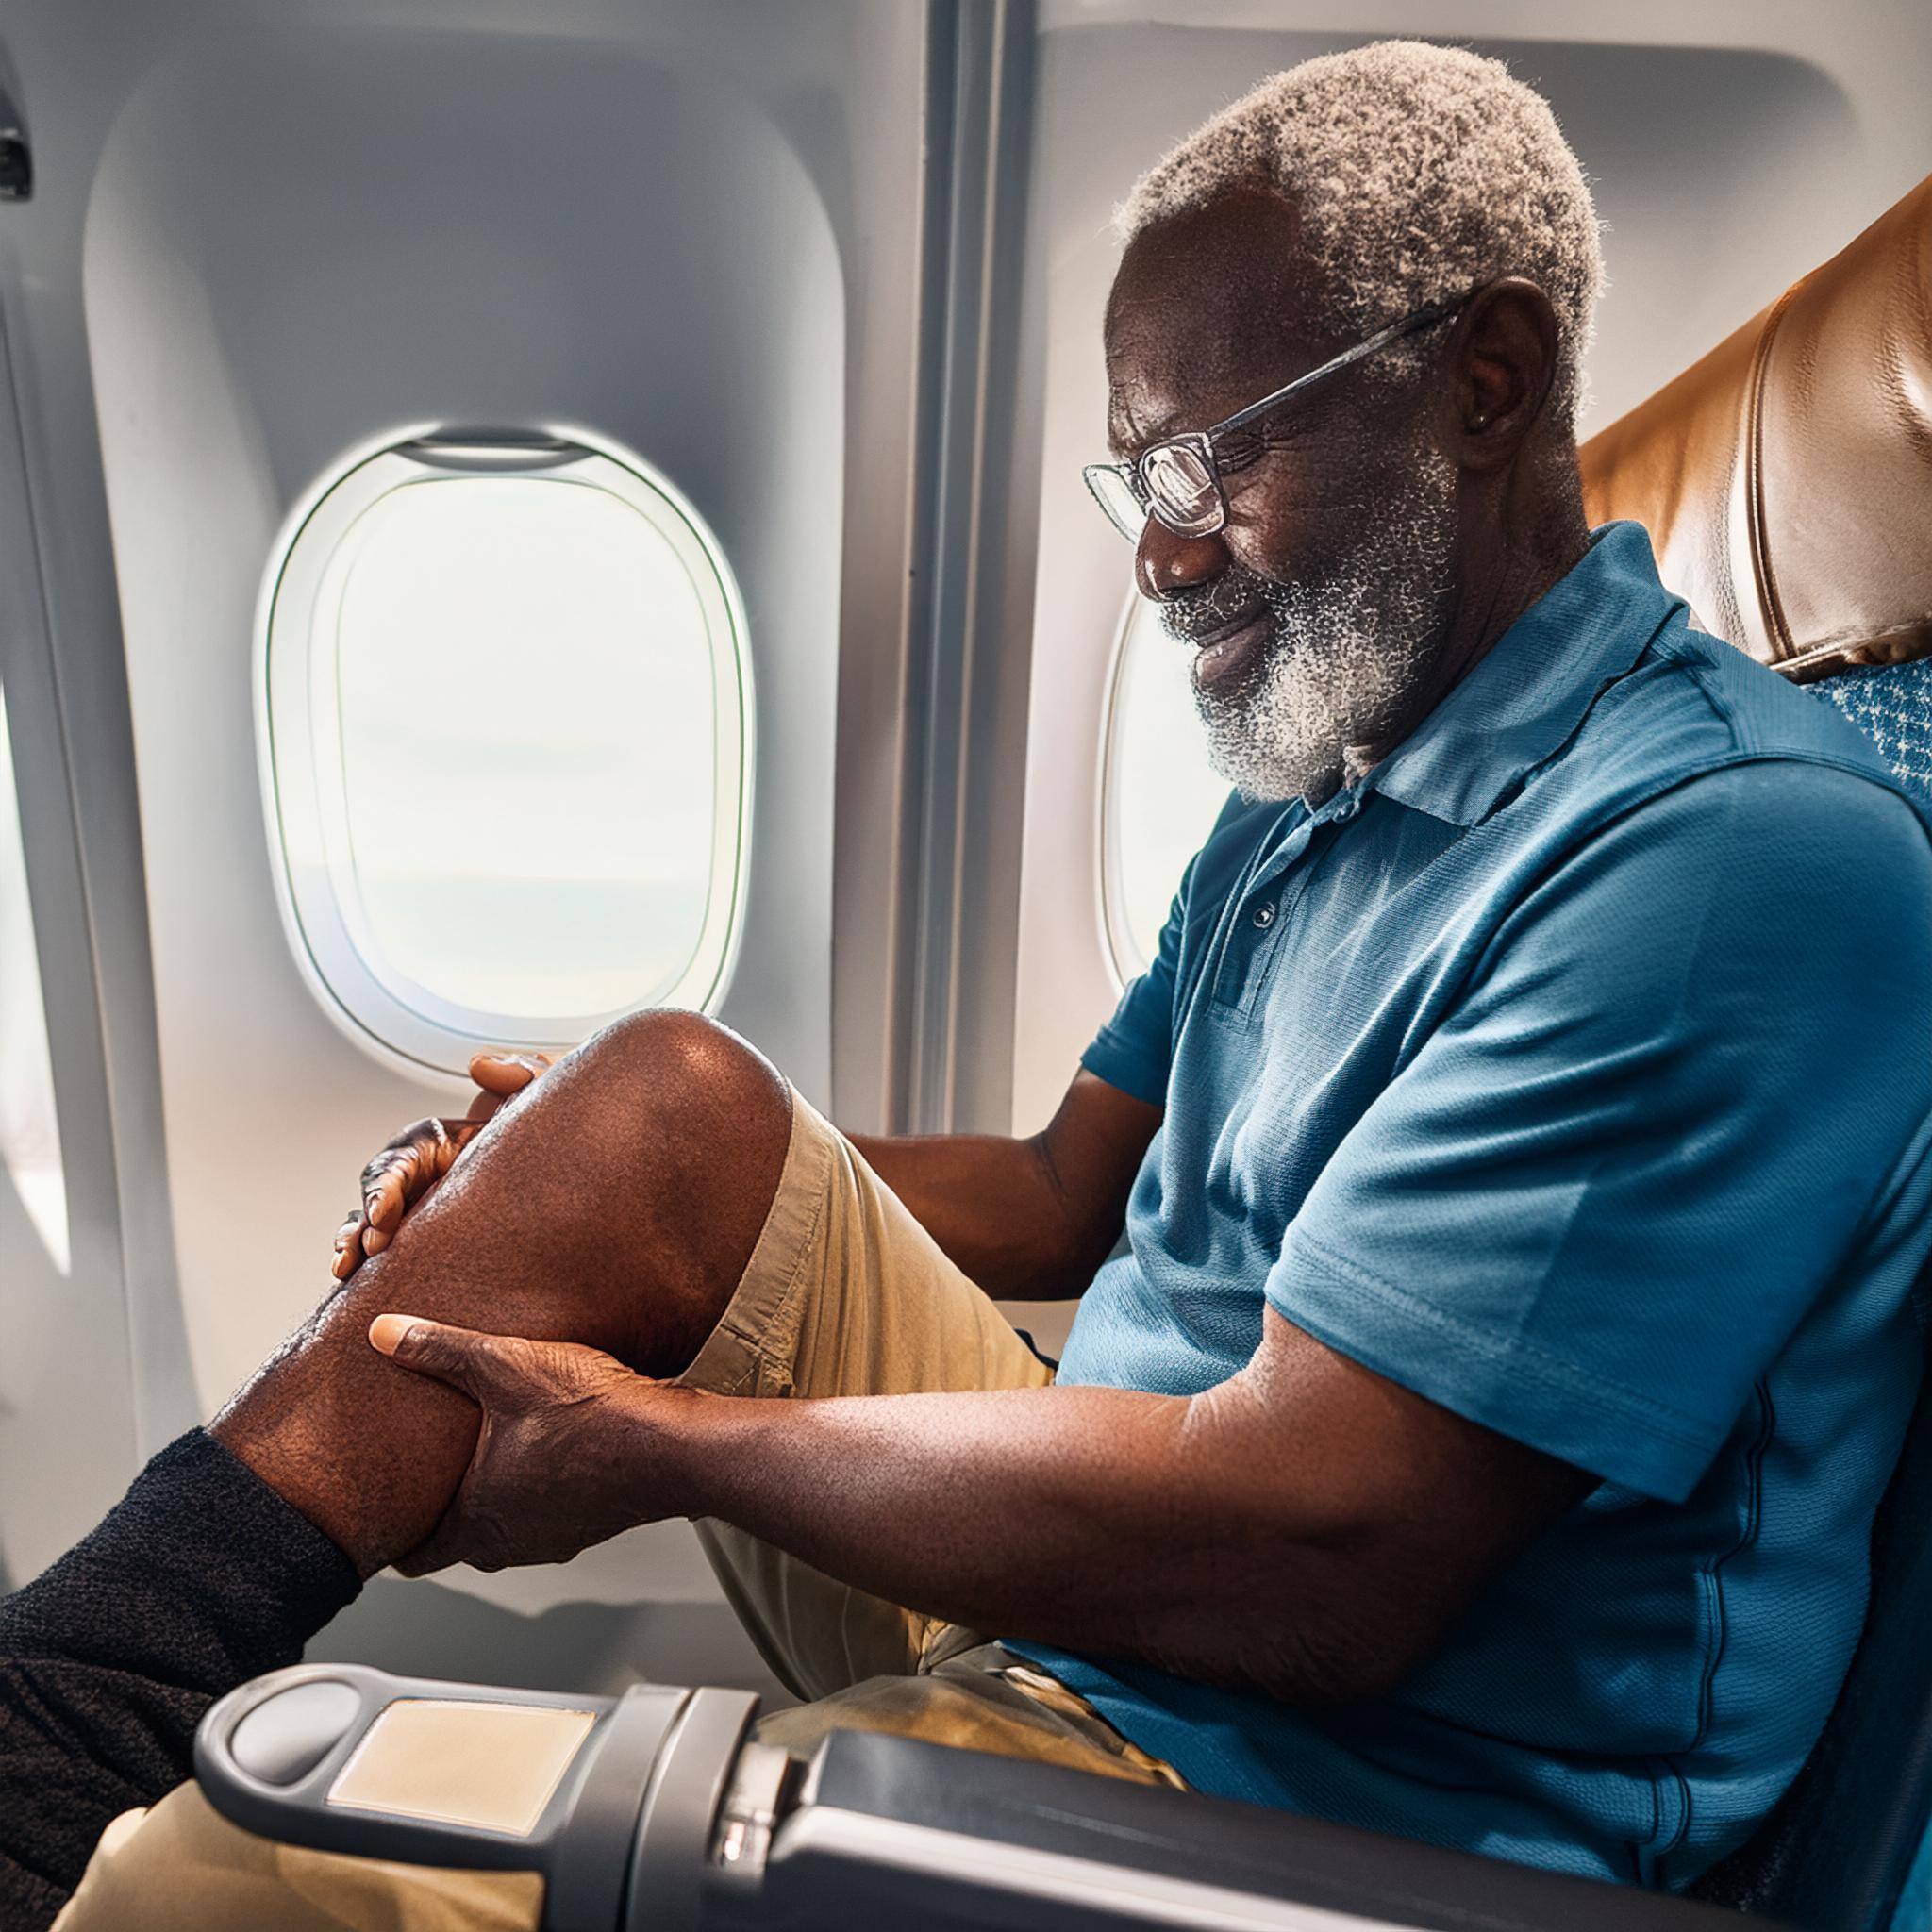 An older man sitting in a plane seat next to a window tending to a swollen leg from DVT.